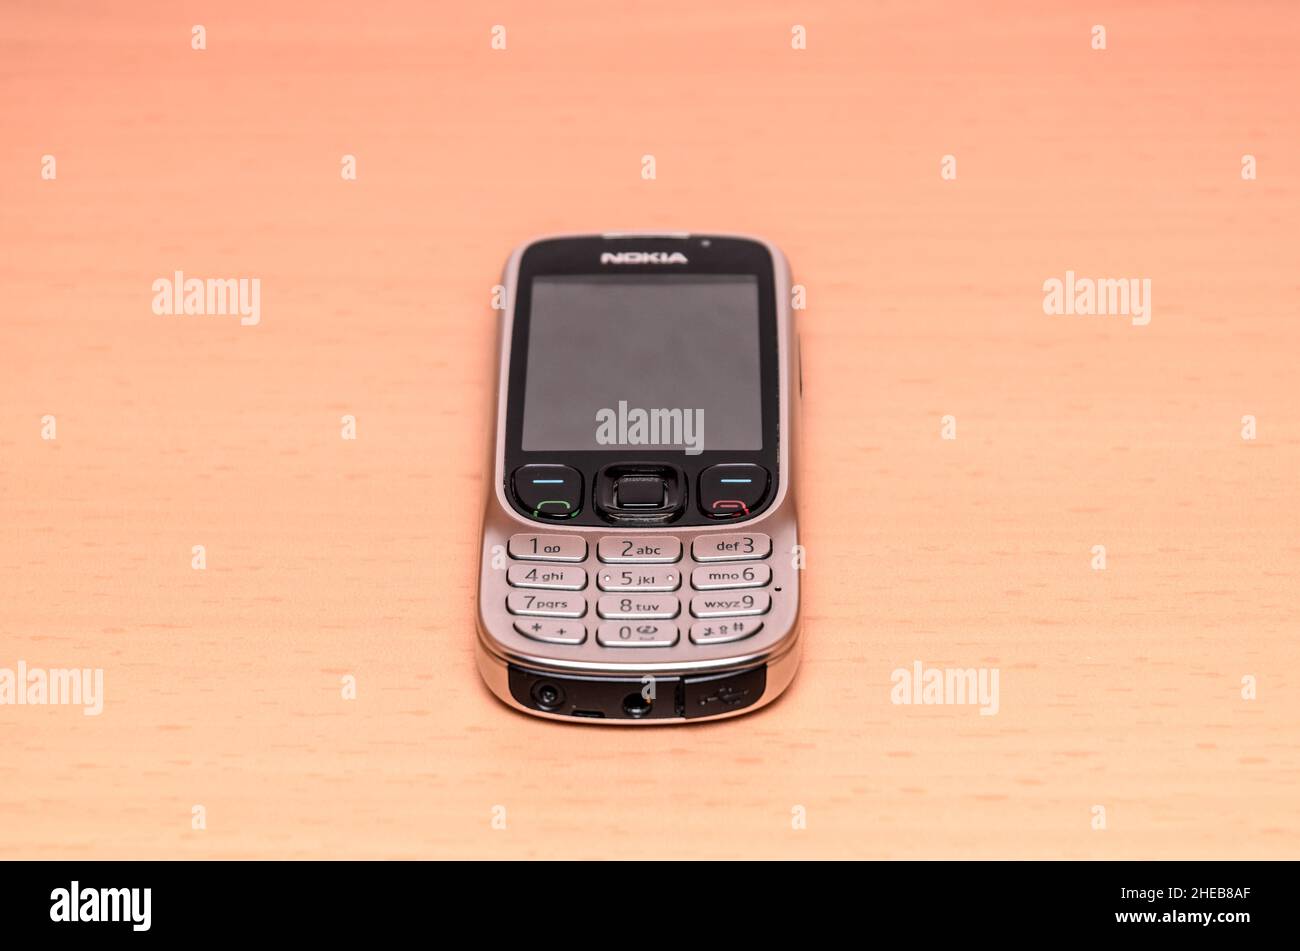 Nokia 6303 classic mobile phone from 2009 on wooden background Stock Photo